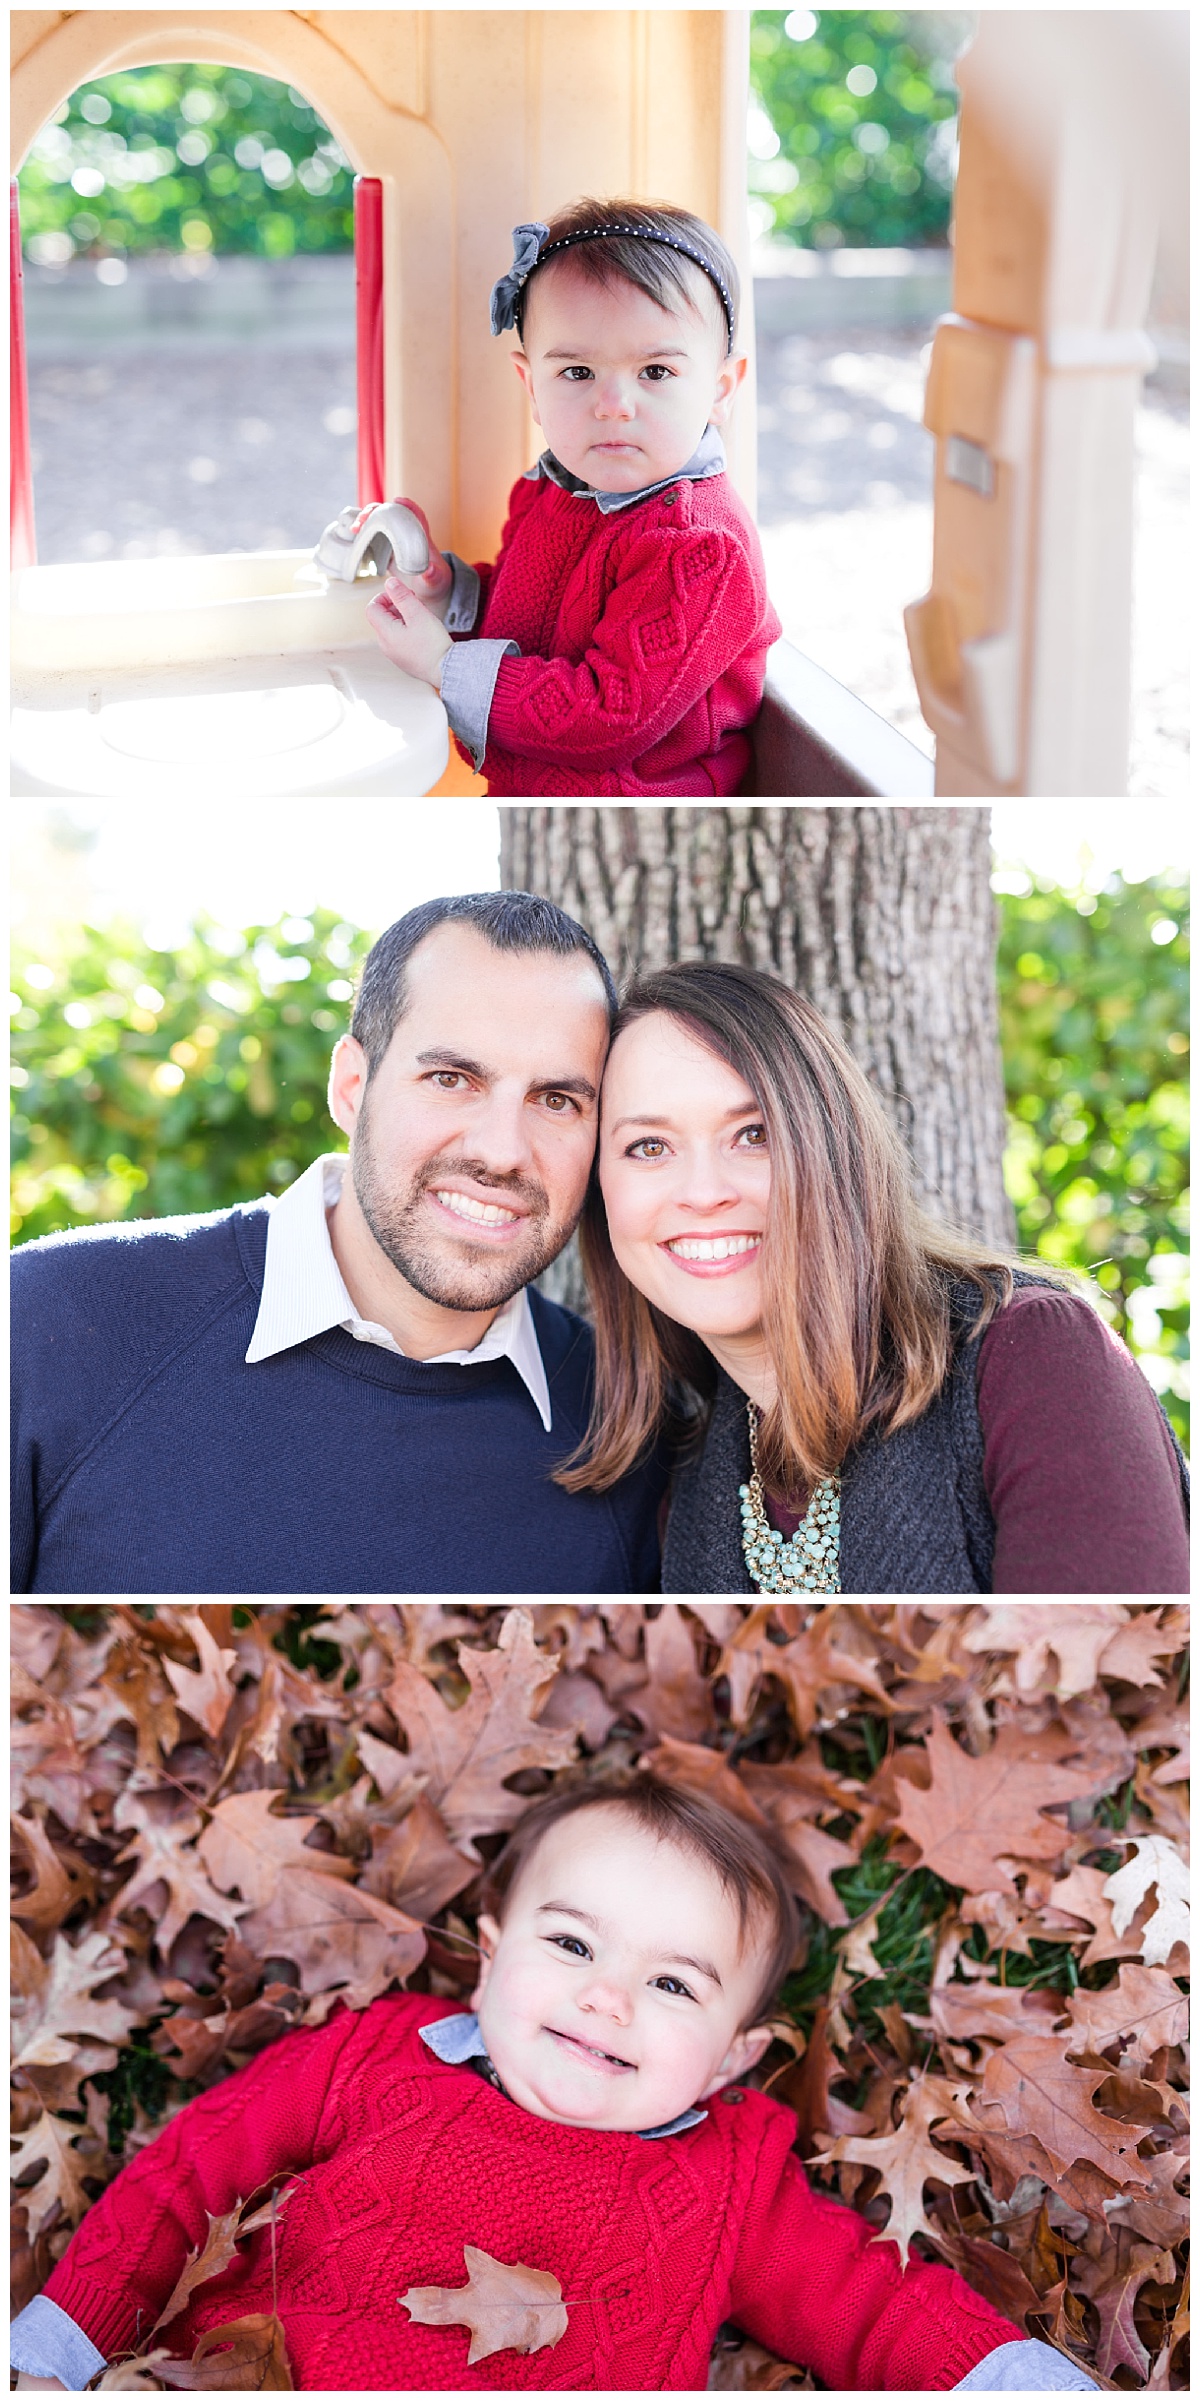 Holiday Family Photos at Home | Showit Blog